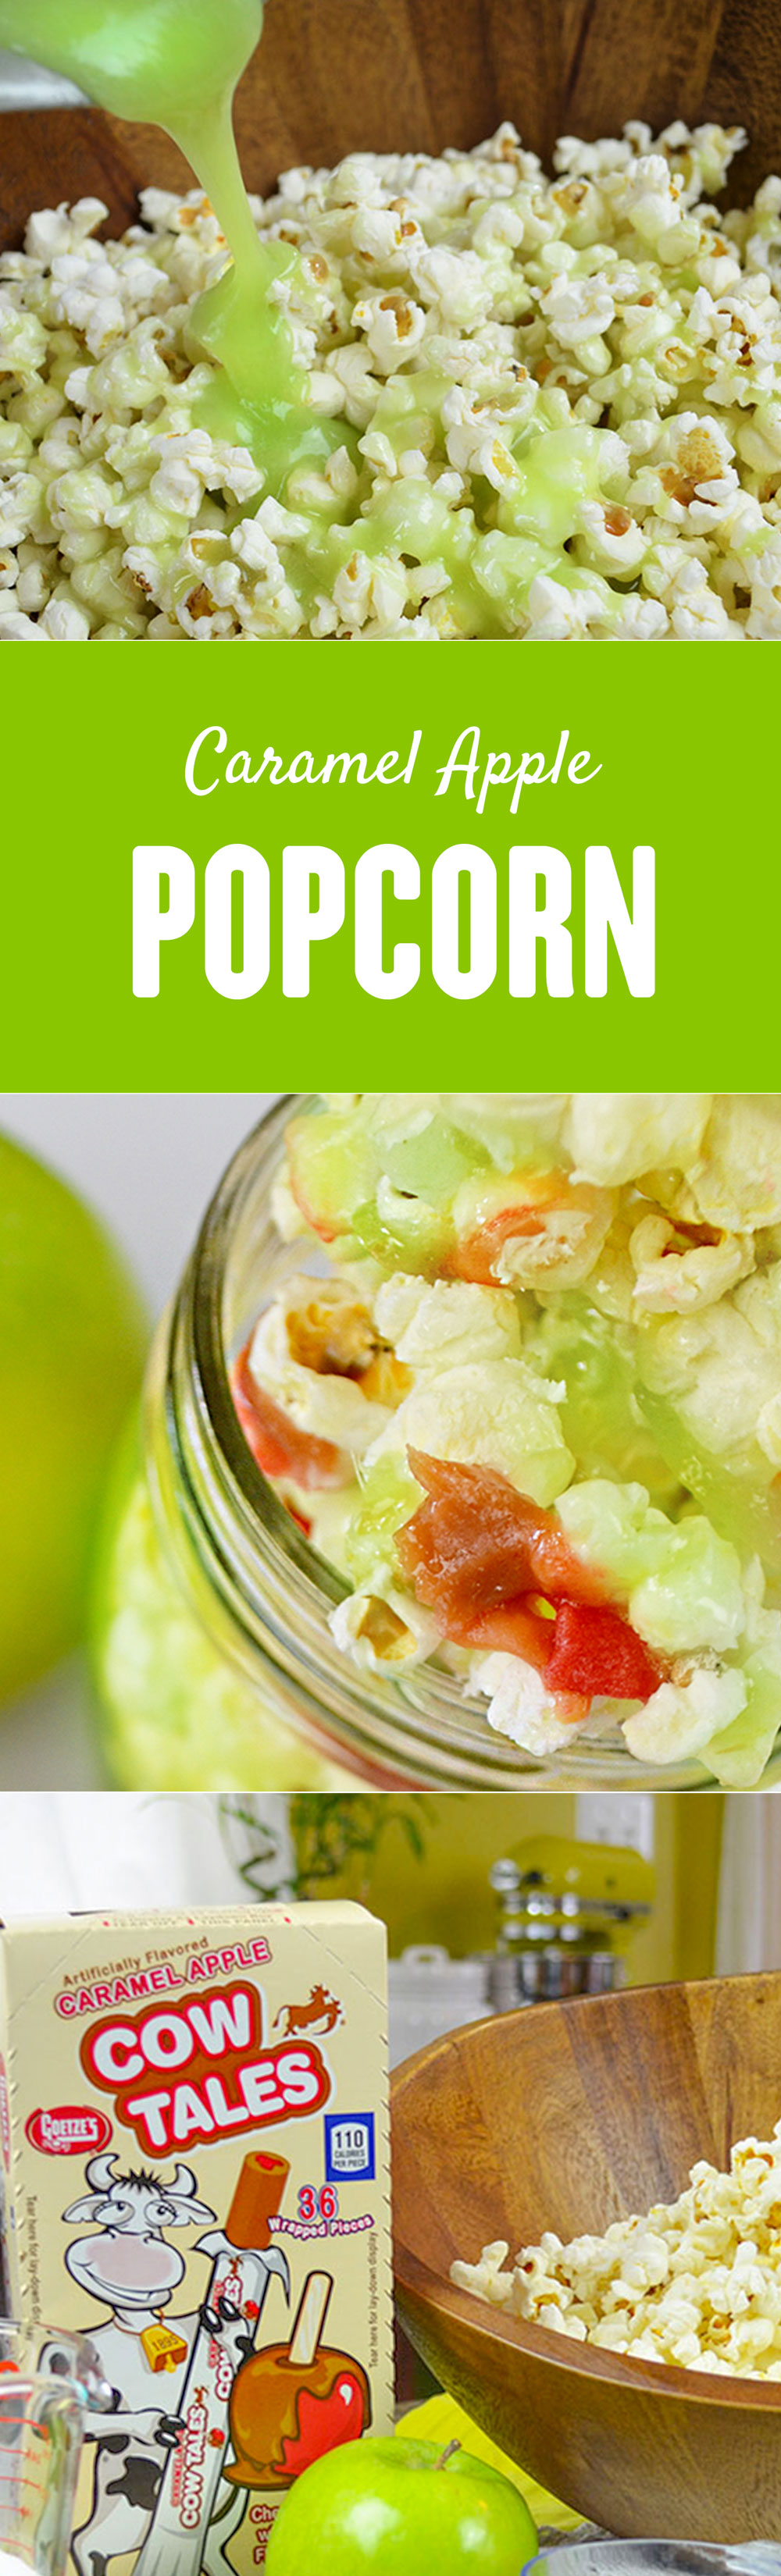 Recipe: Homemade Caramel Apple Popcorn Snack. Sweet & Sour! So good! Made with Caramel Apple Cow Tales and freshly popped popcorn. 